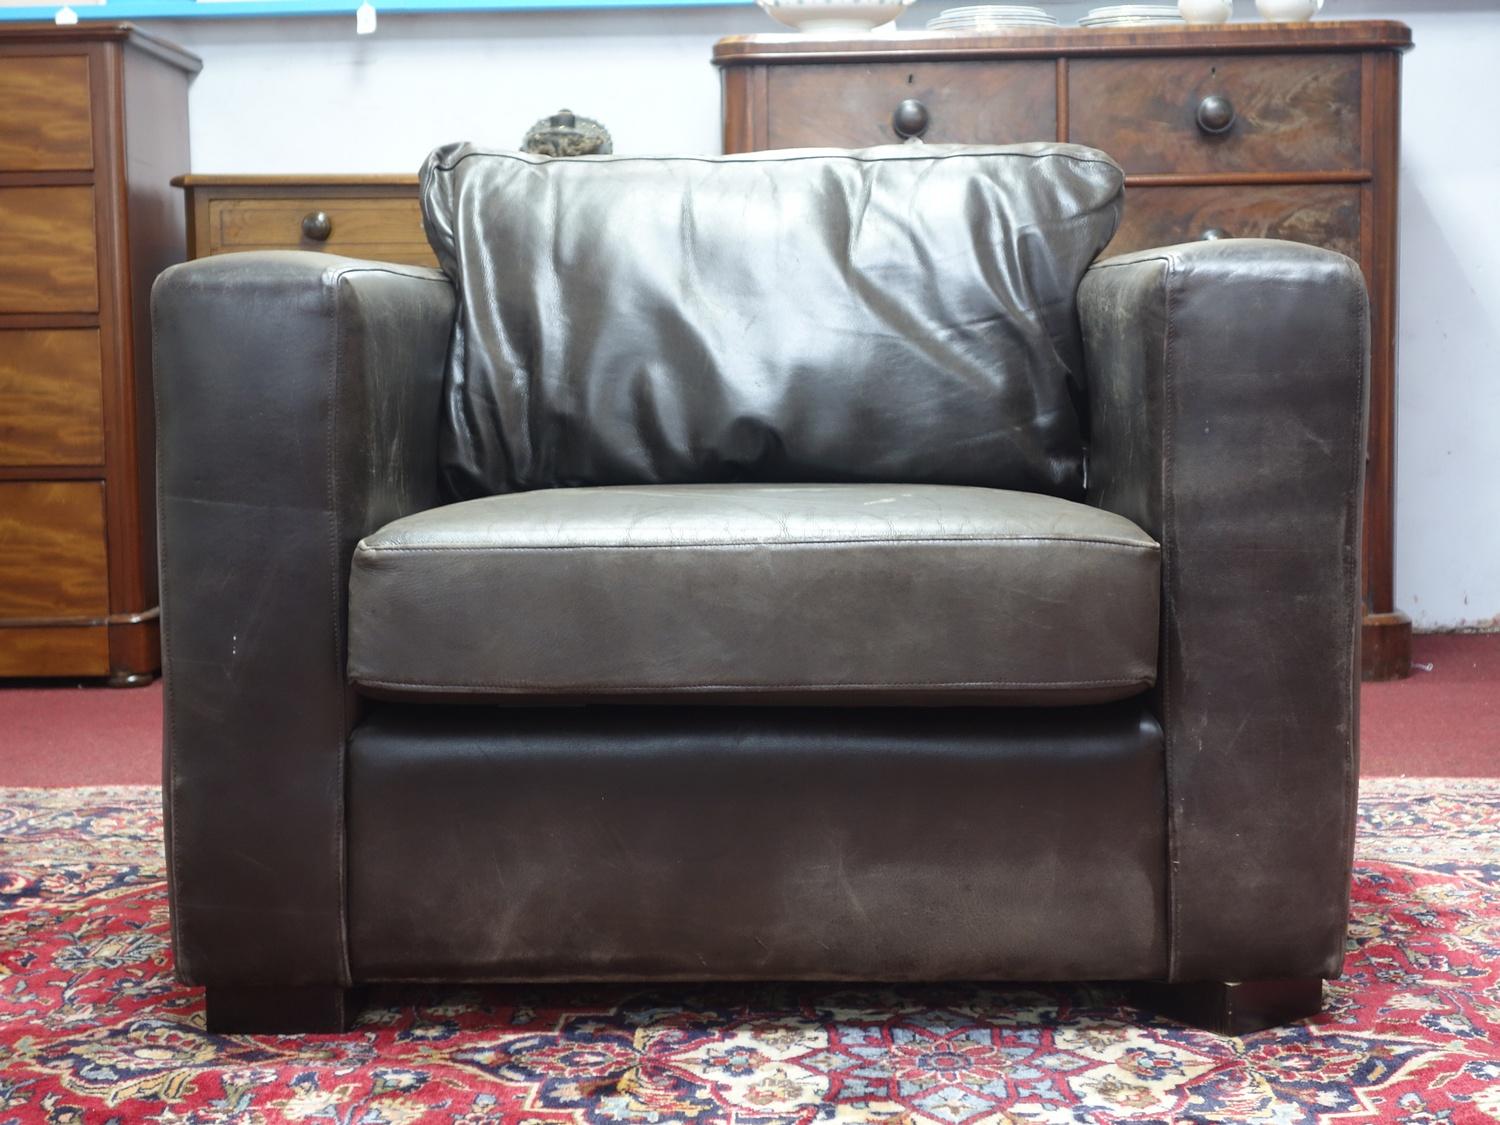 A contemporary leather armchair